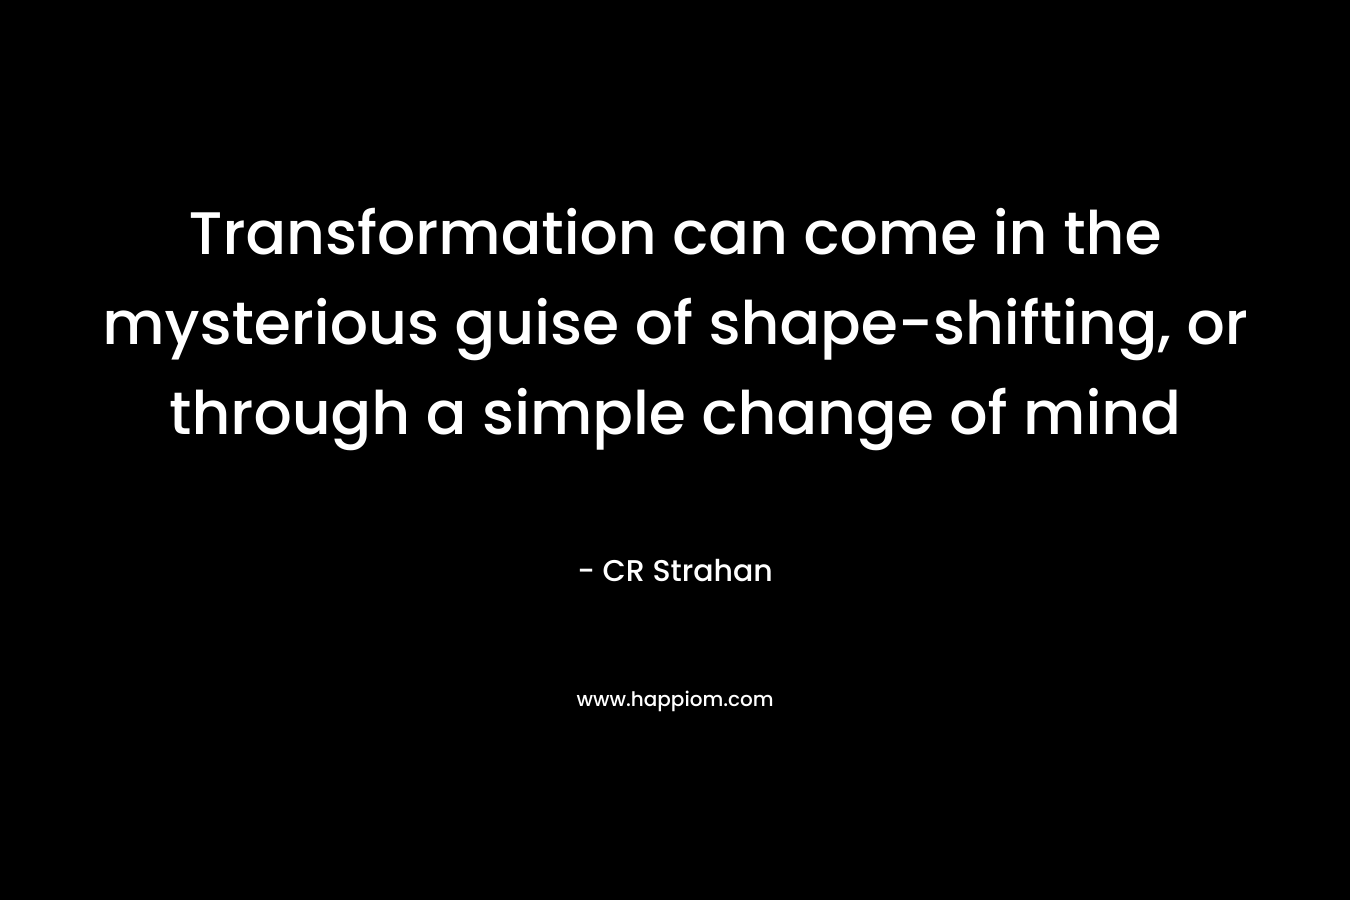 Transformation can come in the mysterious guise of shape-shifting, or through a simple change of mind – CR Strahan